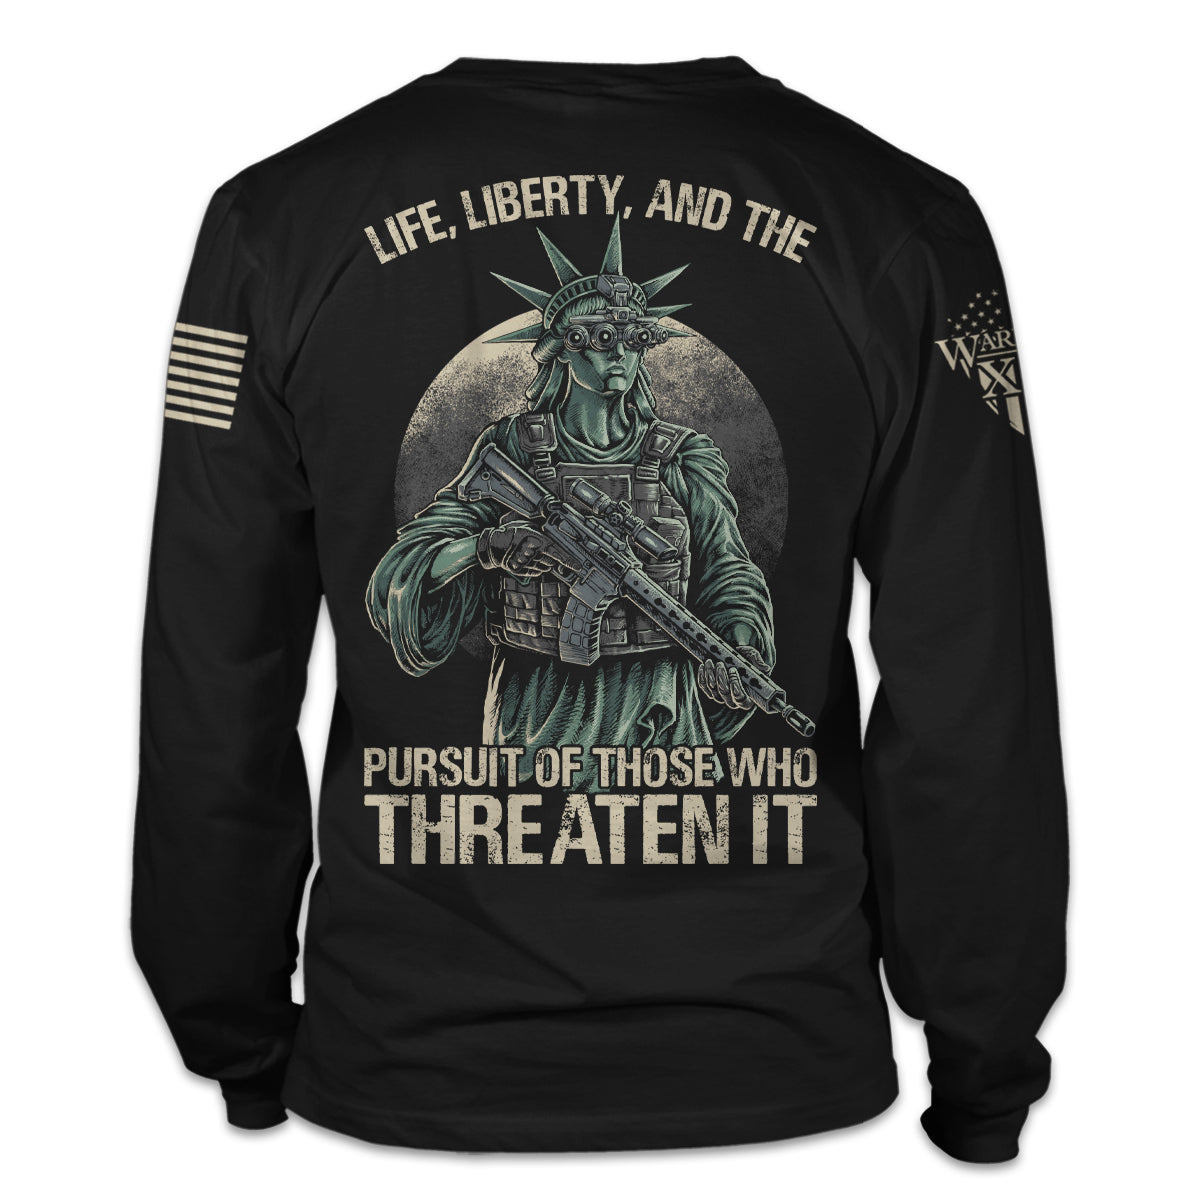 A black long sleeve shirt with the words "Life, liberty, and the pursuit of those who threaten it" with the statue of liberty holding a gun printed on the back of the shirt.